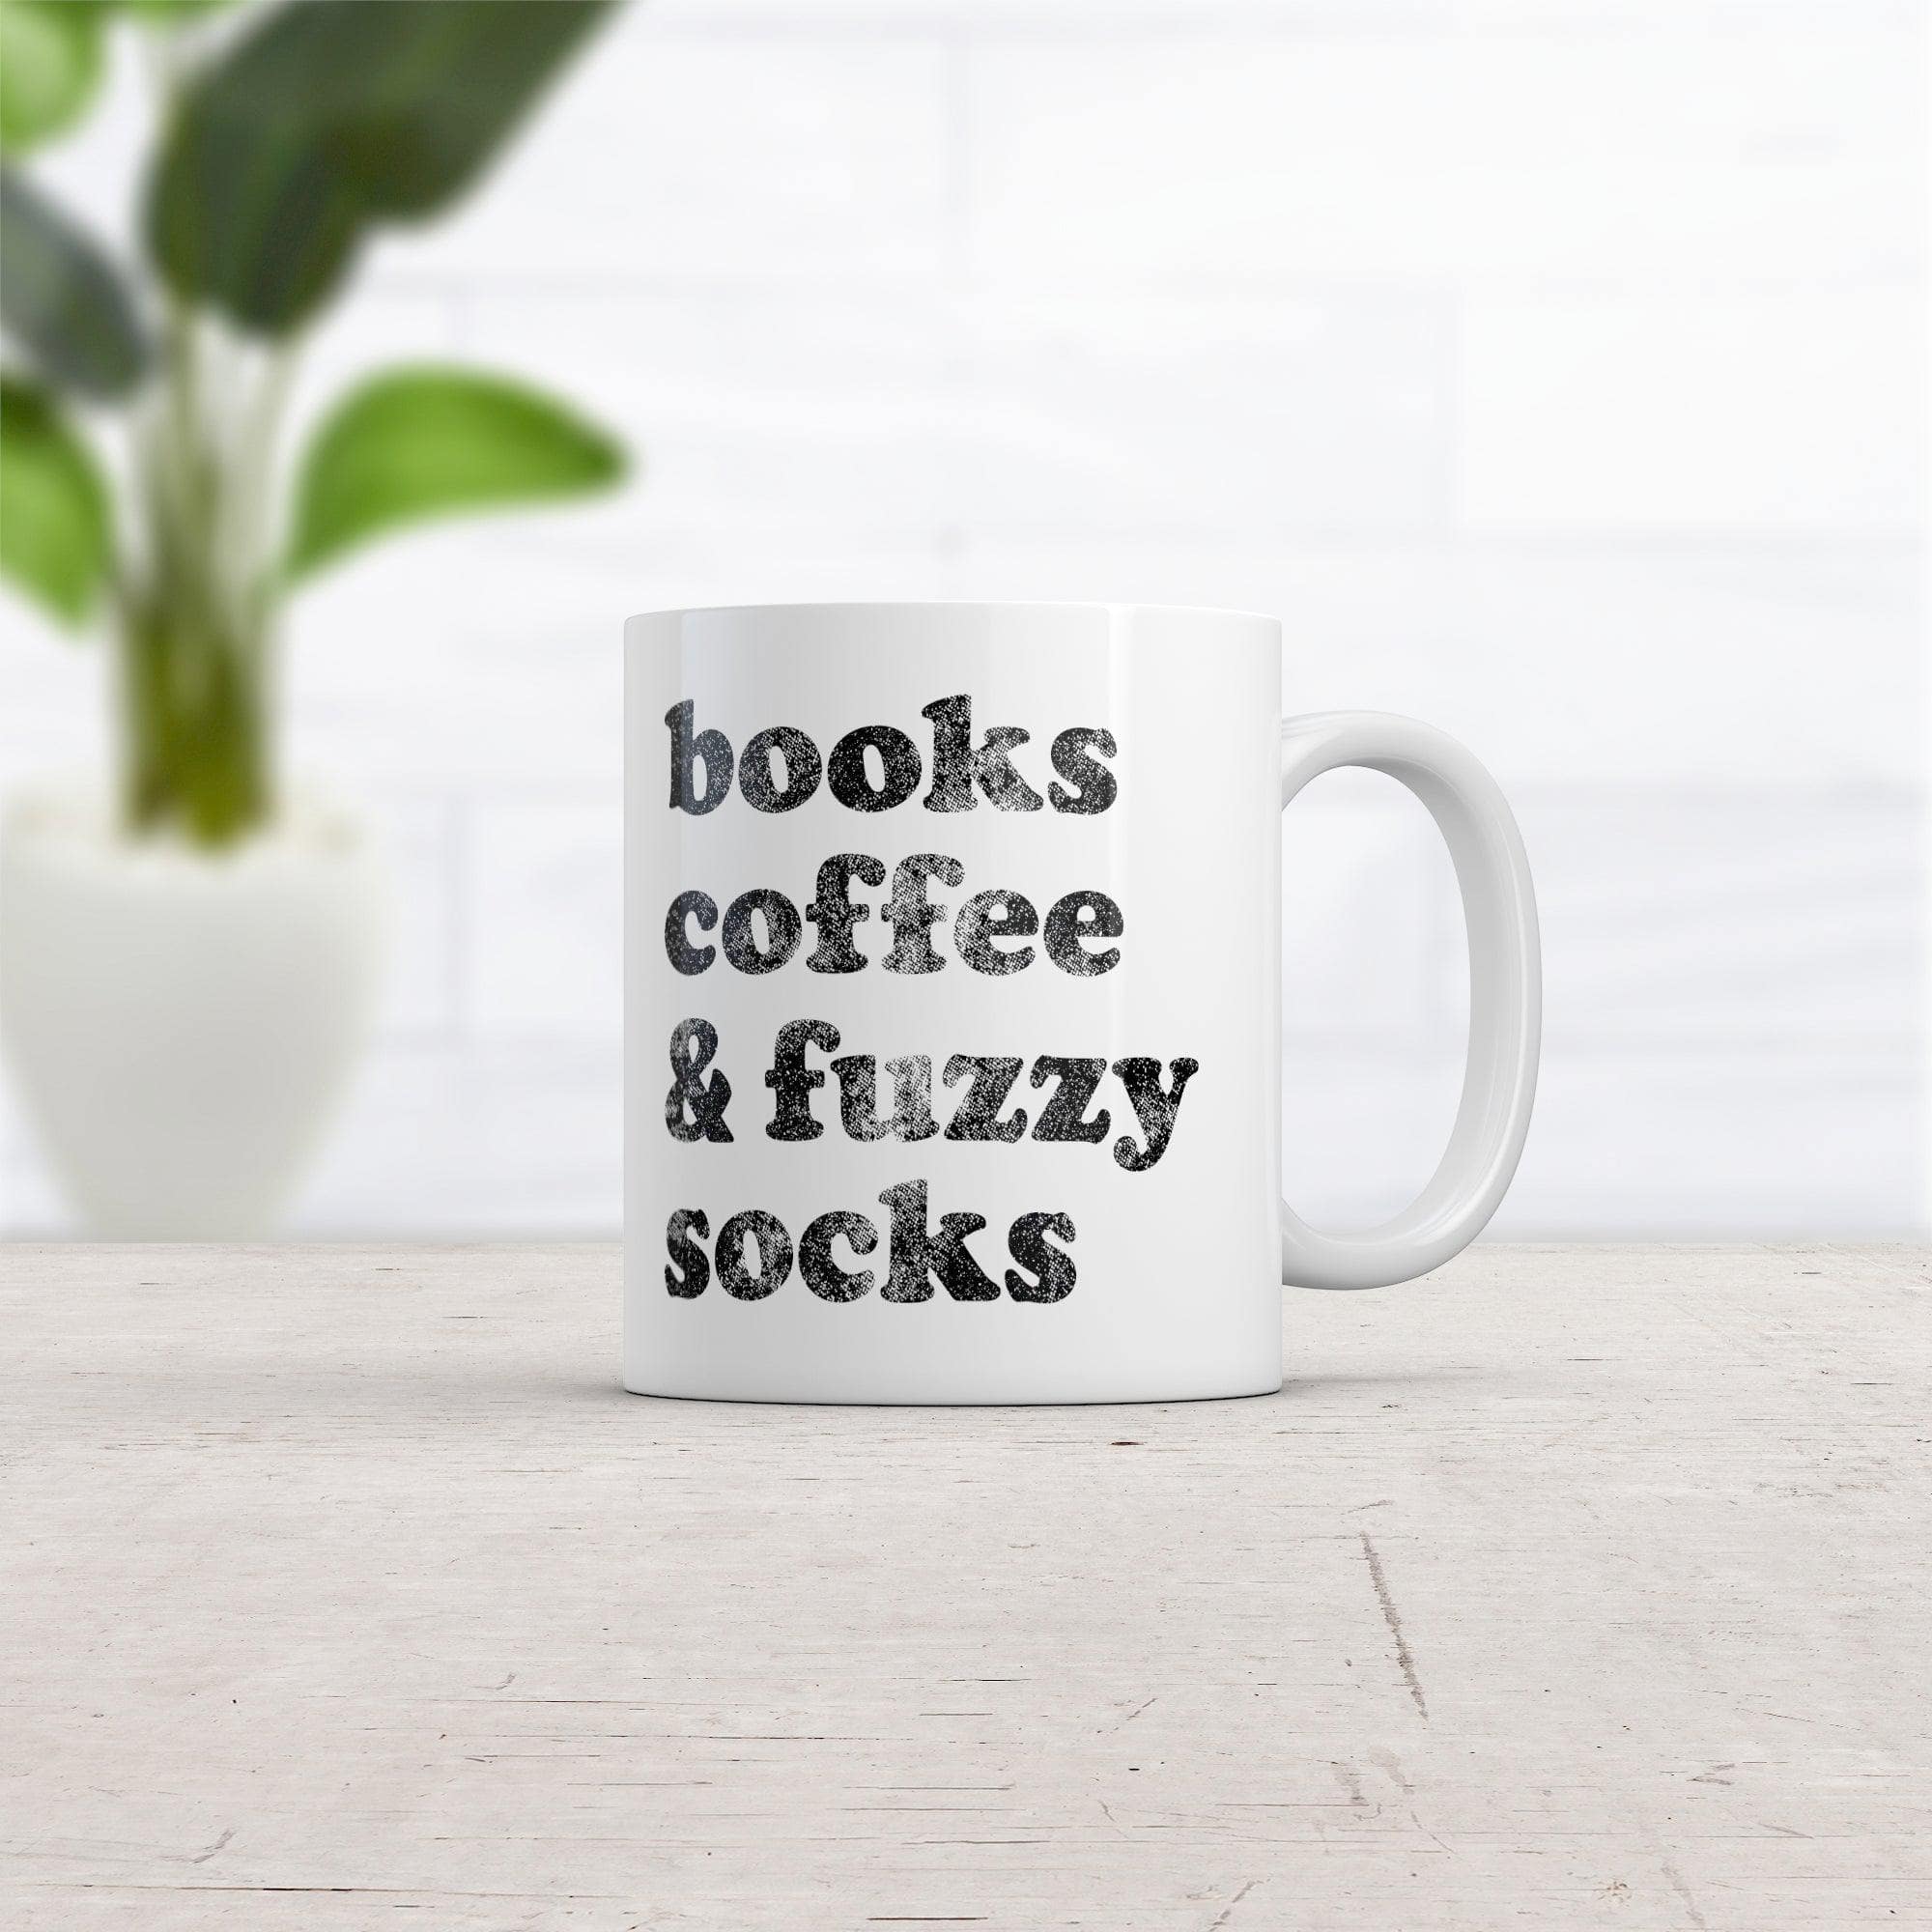 Books Coffee And Fuzzy Socks Mug Funny Cute Cozy Text Graphic Novelty Cup-11oz  -  Crazy Dog T-Shirts